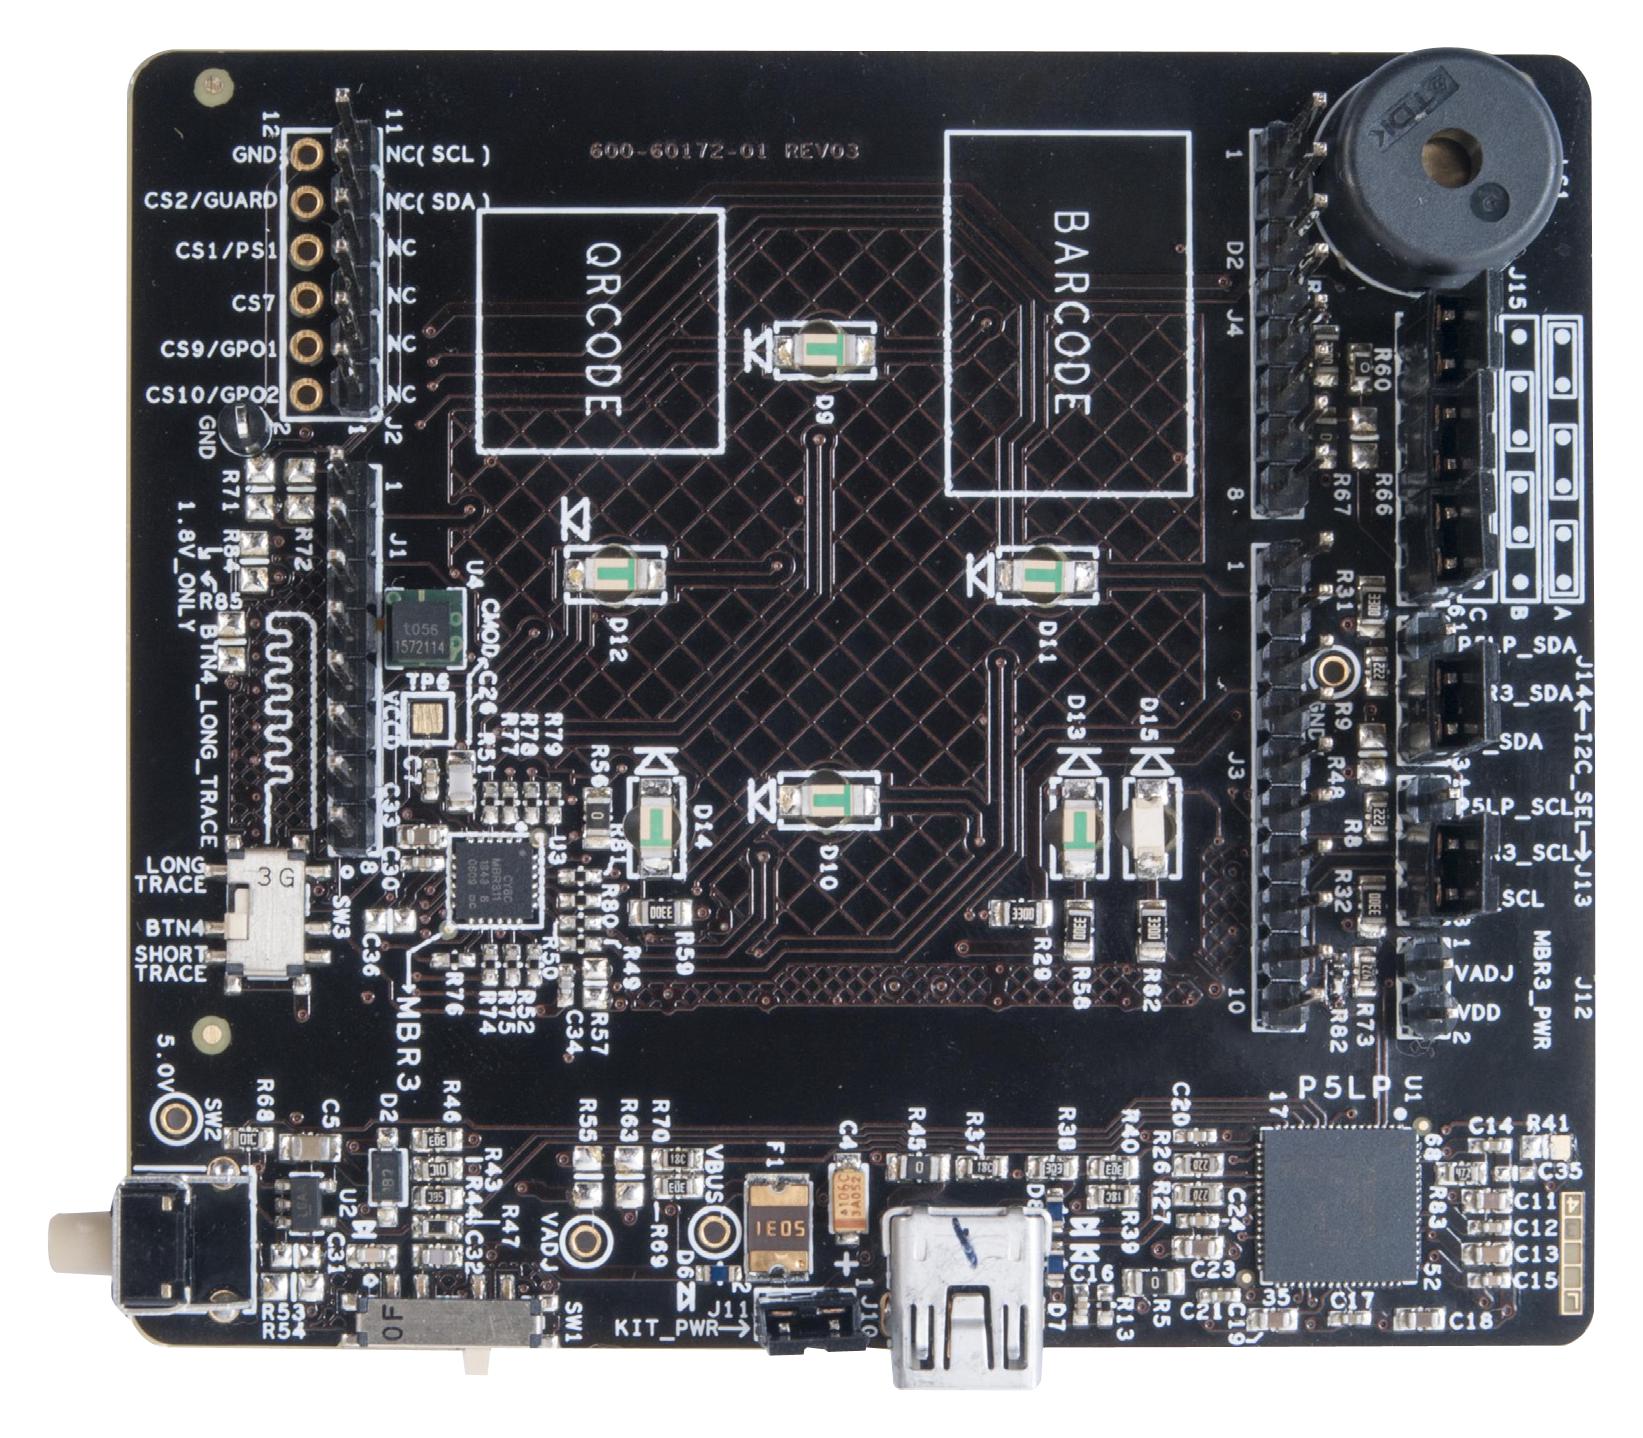 CY3280-MBR3 EVALUATION BOARD, MBR3 CAPSENSE CYPRESS - INFINEON TECHNOLOGIES